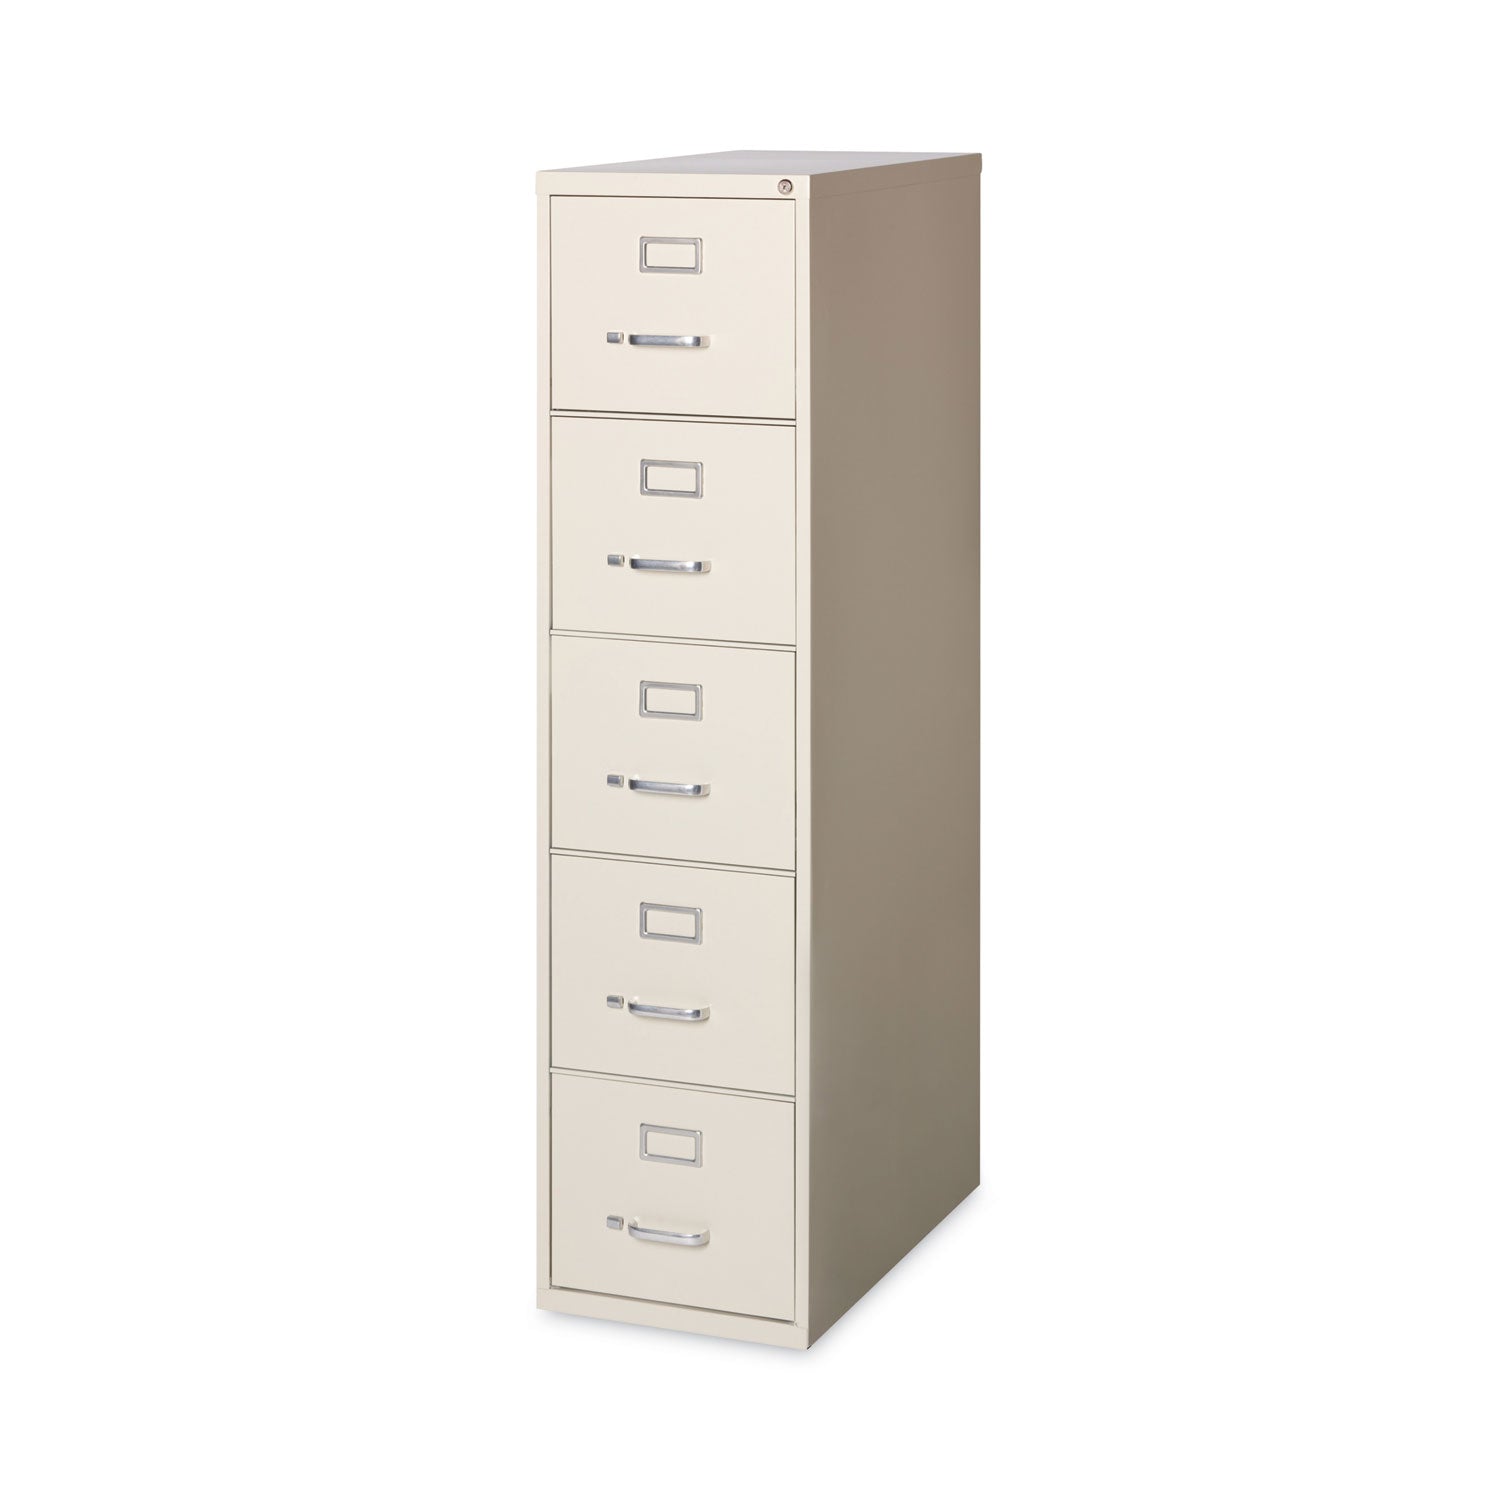 vertical-letter-file-cabinet-5-letter-size-file-drawers-putty-15-x-265-x-6137_hid17777 - 1